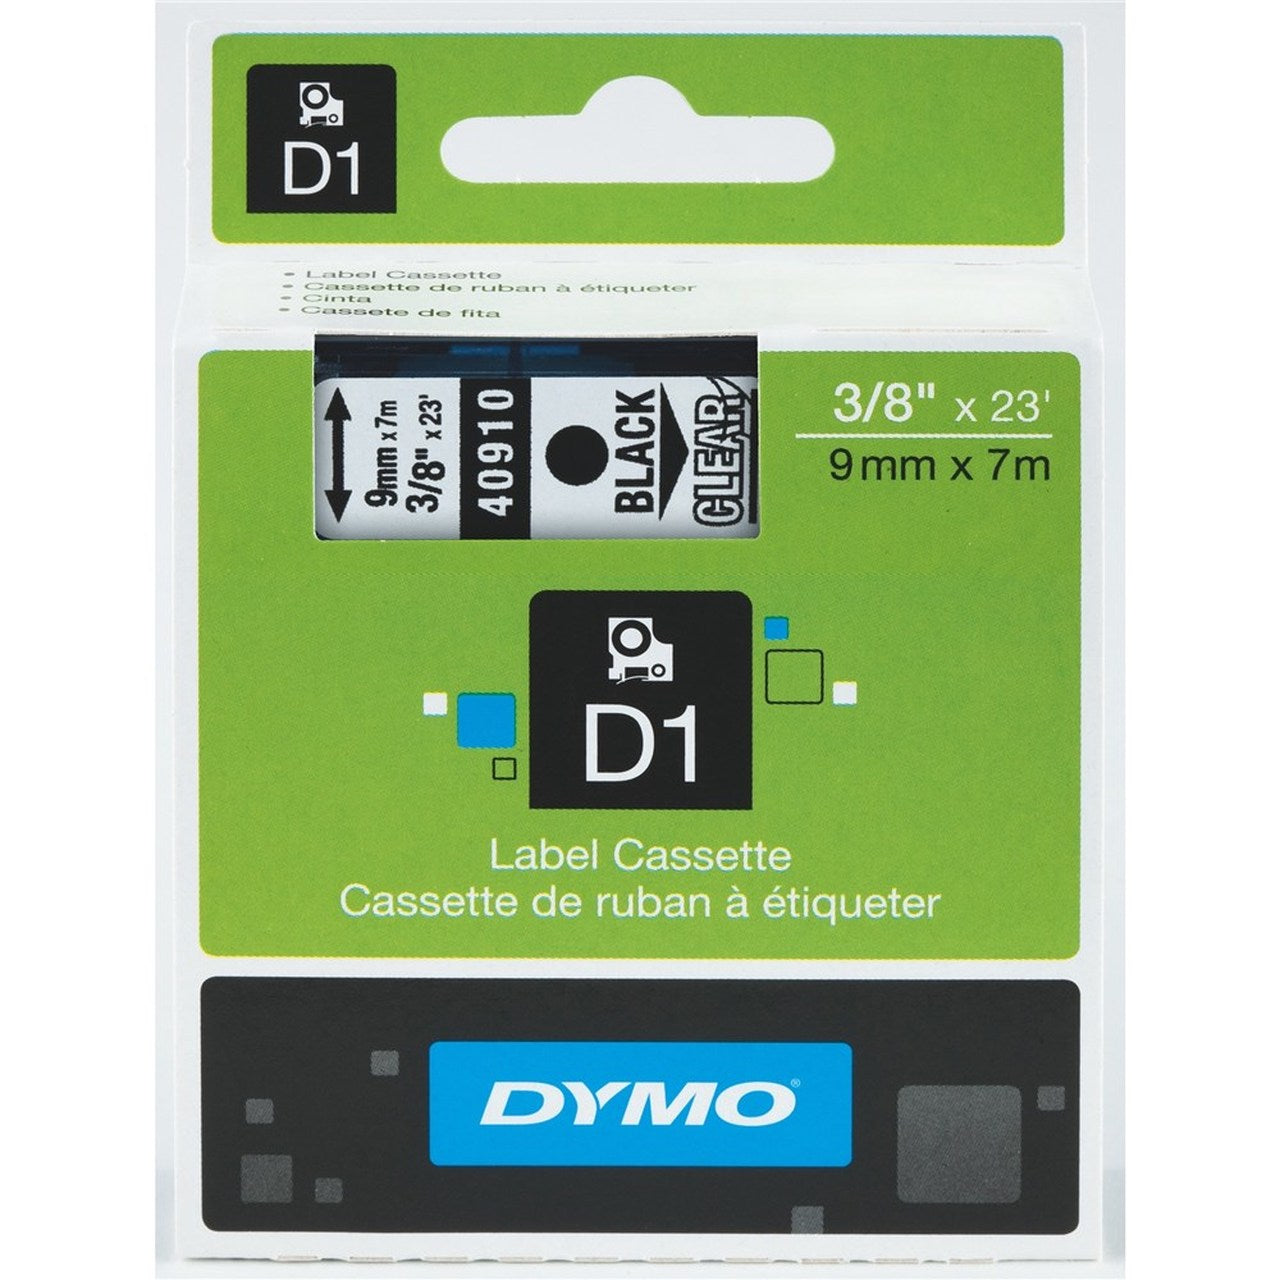 S0720670 Dymo D1 9mm x 7m Label Tape Black on Clear